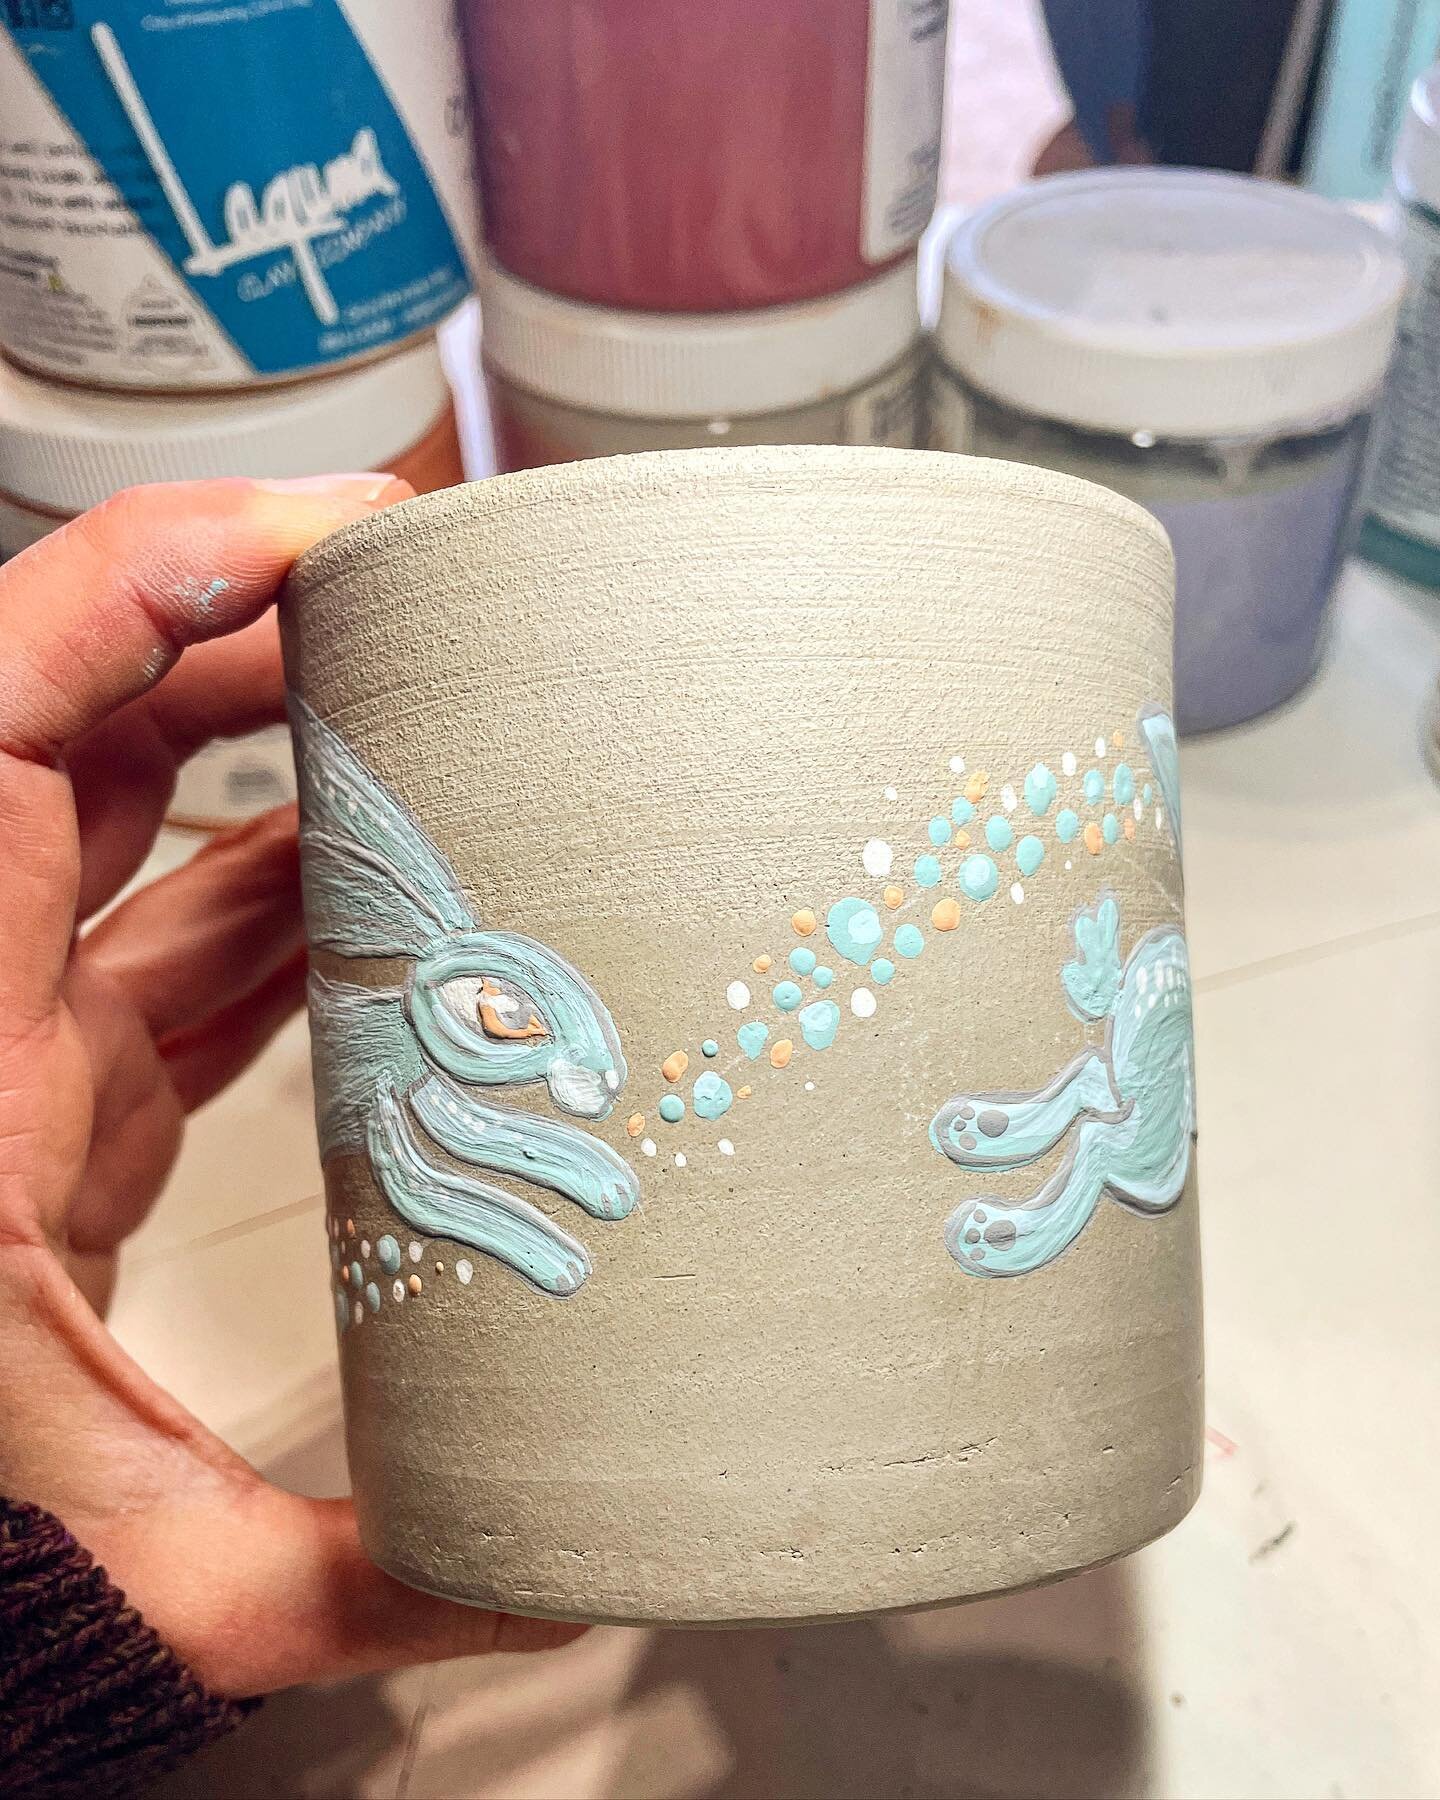 Collaboration time! Been working with my friend @rusty_dog_ceramics on a collection of one-of-a-kind mugs for the Sip Show at @mazamarartpottery. Opener is Friday February 9th and the show runs through March 24th. It&rsquo;s been over 20 years since 